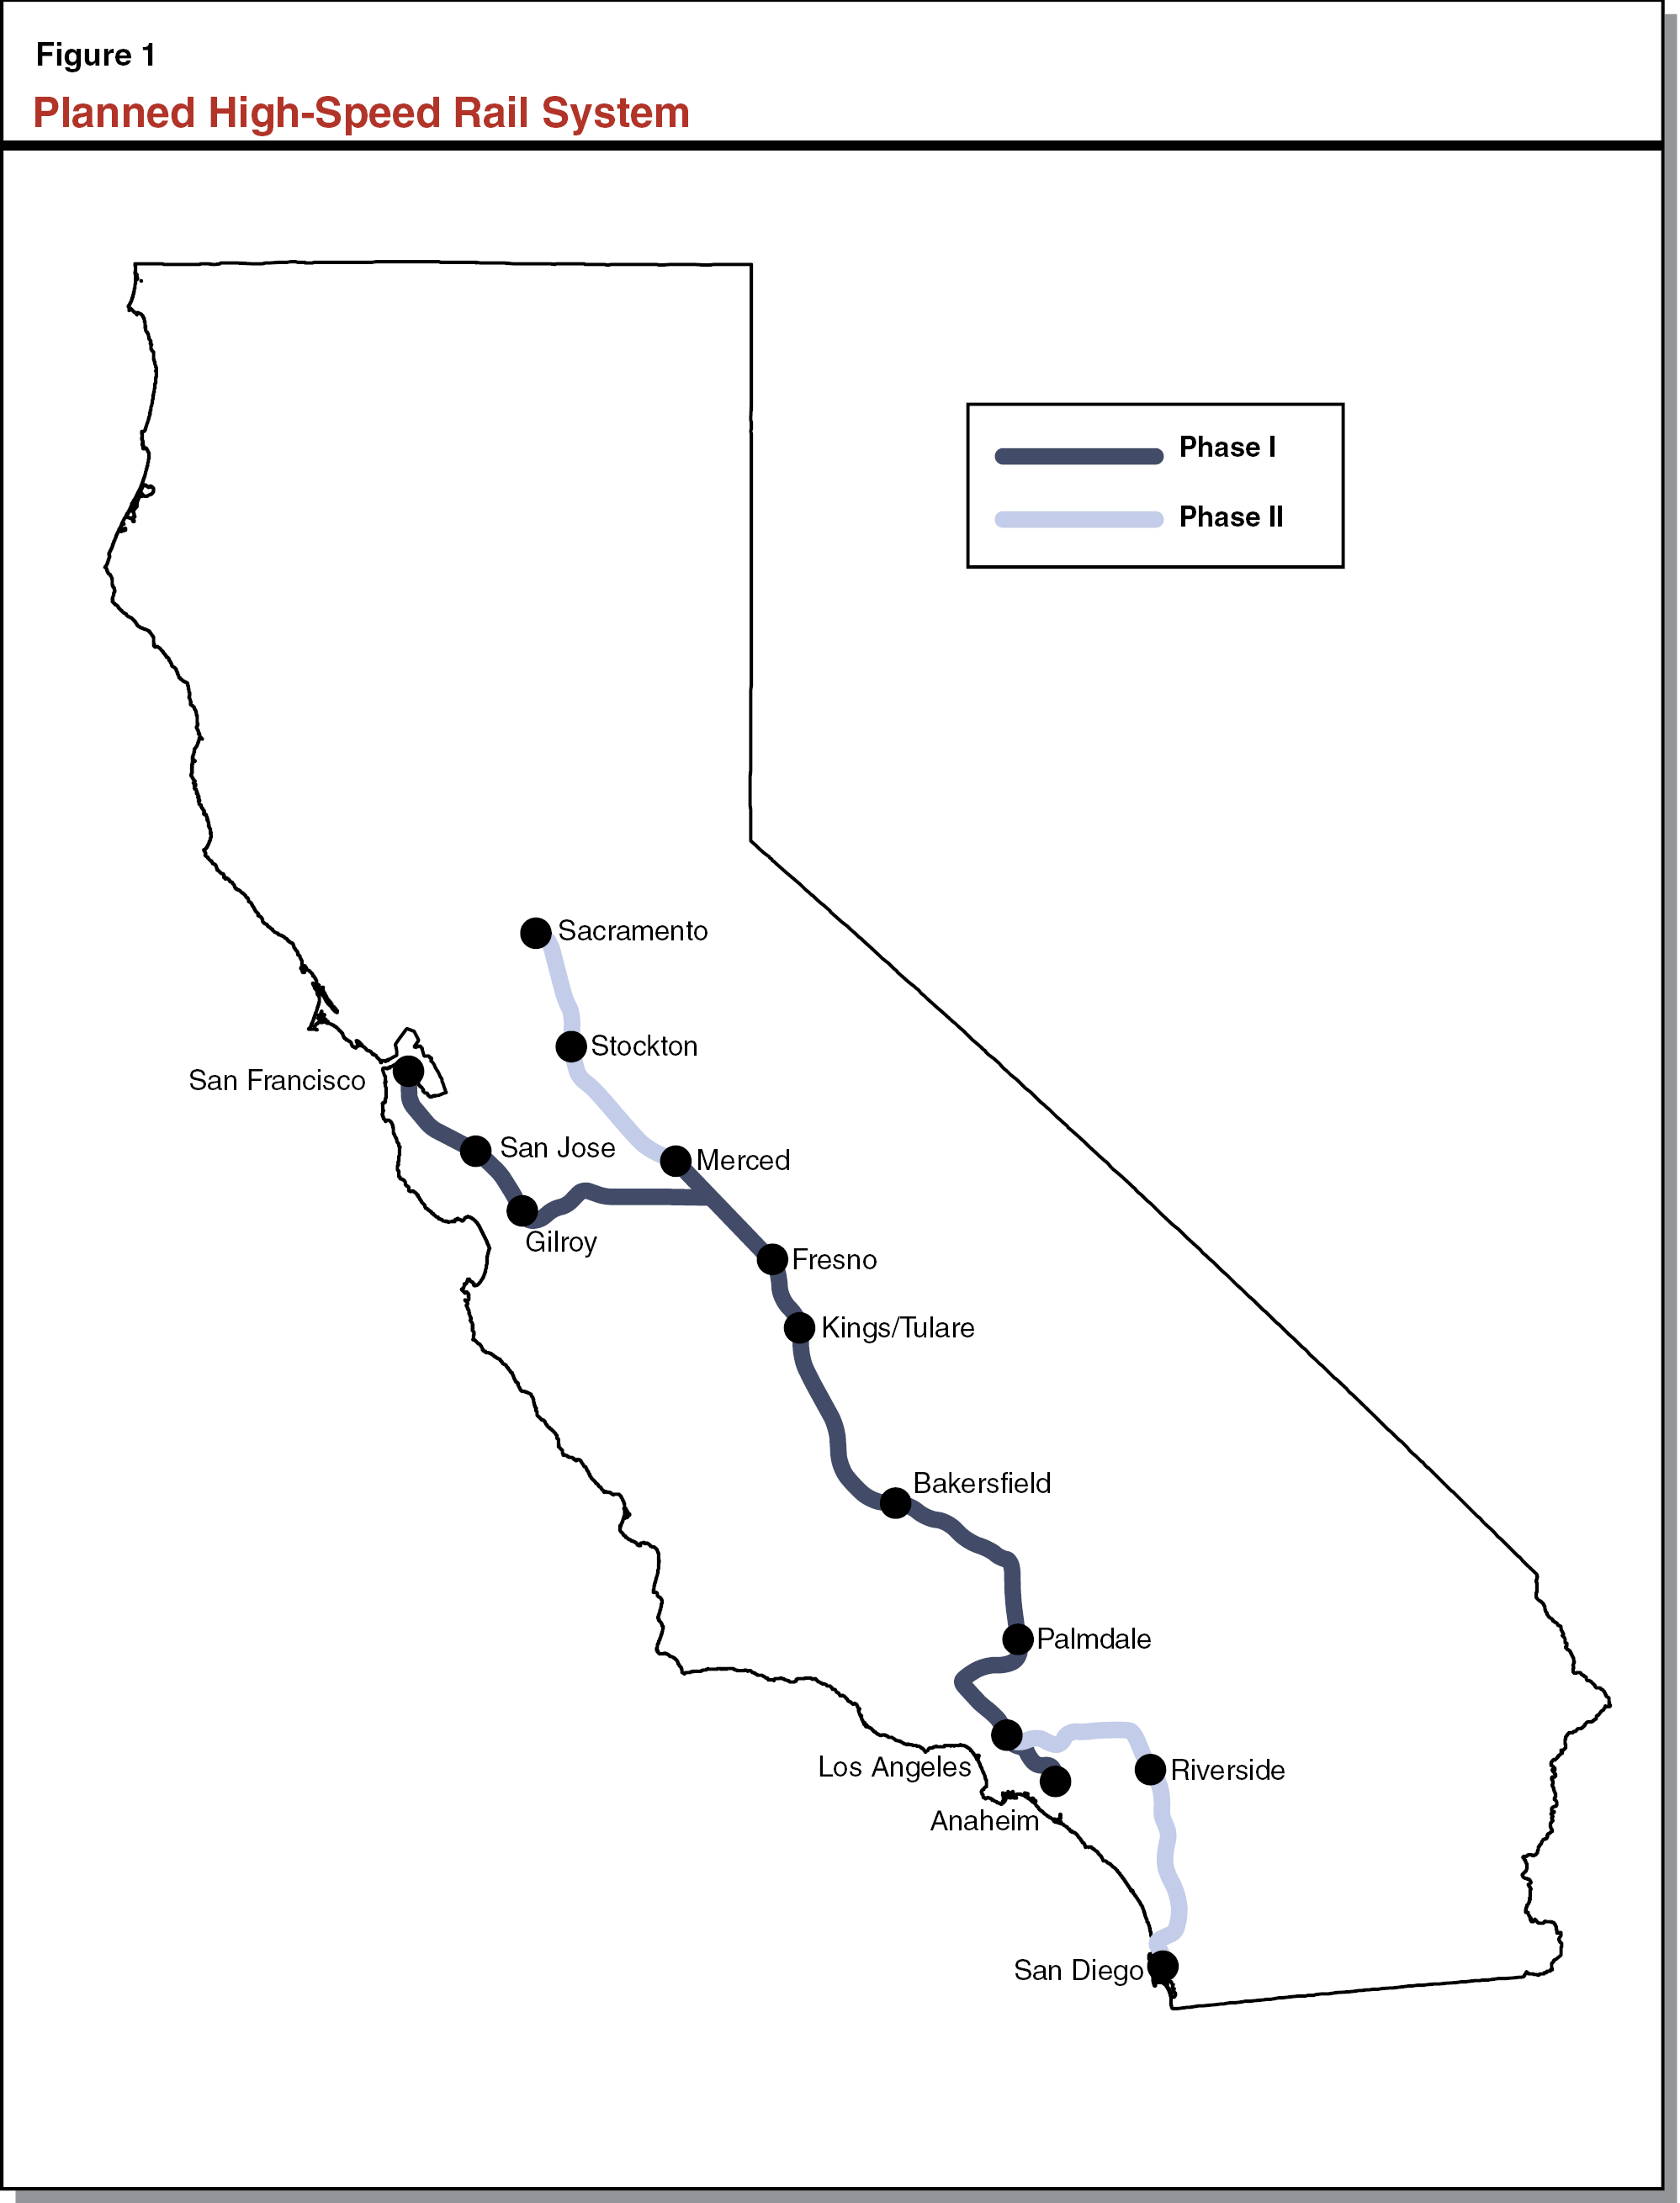 Figure 1 - Planned High-Speed Rail System